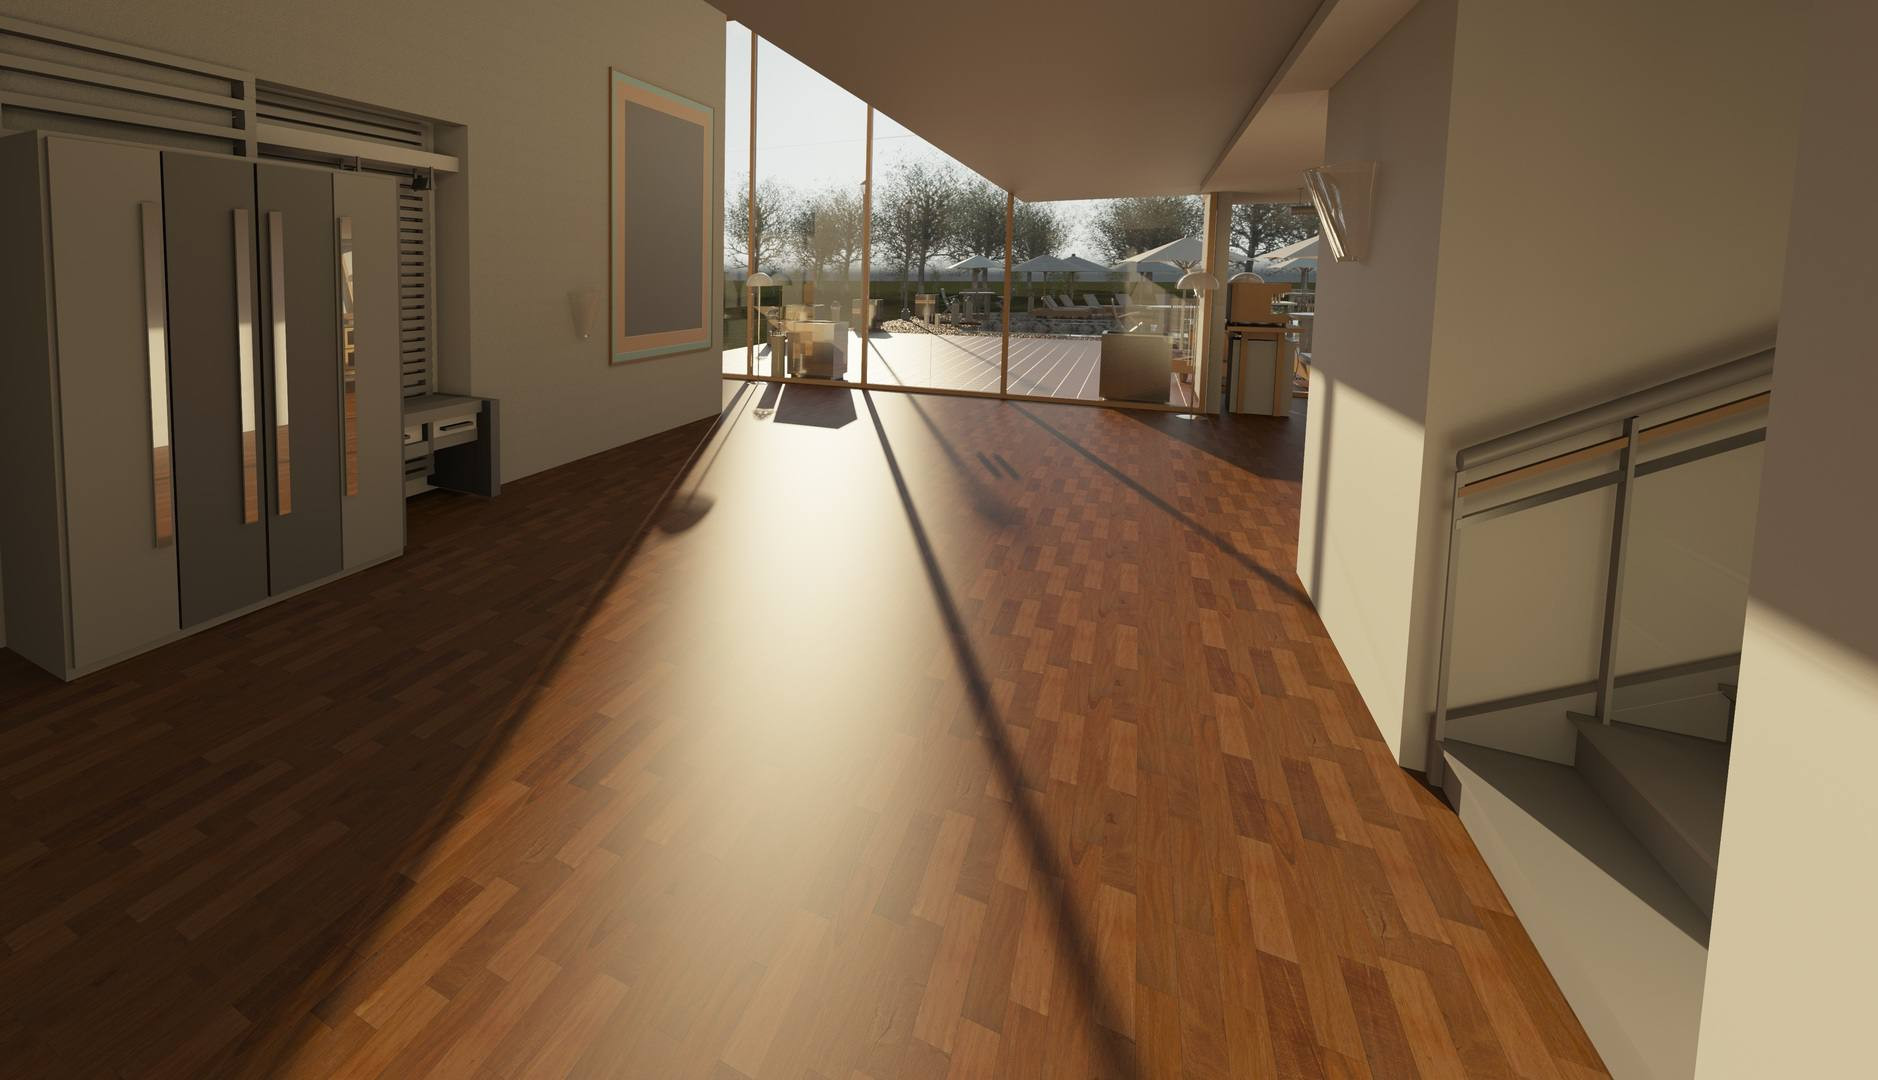 21 Great Hardwood Flooring for Sale Near Me 2024 free download hardwood flooring for sale near me of common flooring types currently used in renovation and building for architecture wood house floor interior window 917178 pxhere com 5ba27a2cc9e77c00503b